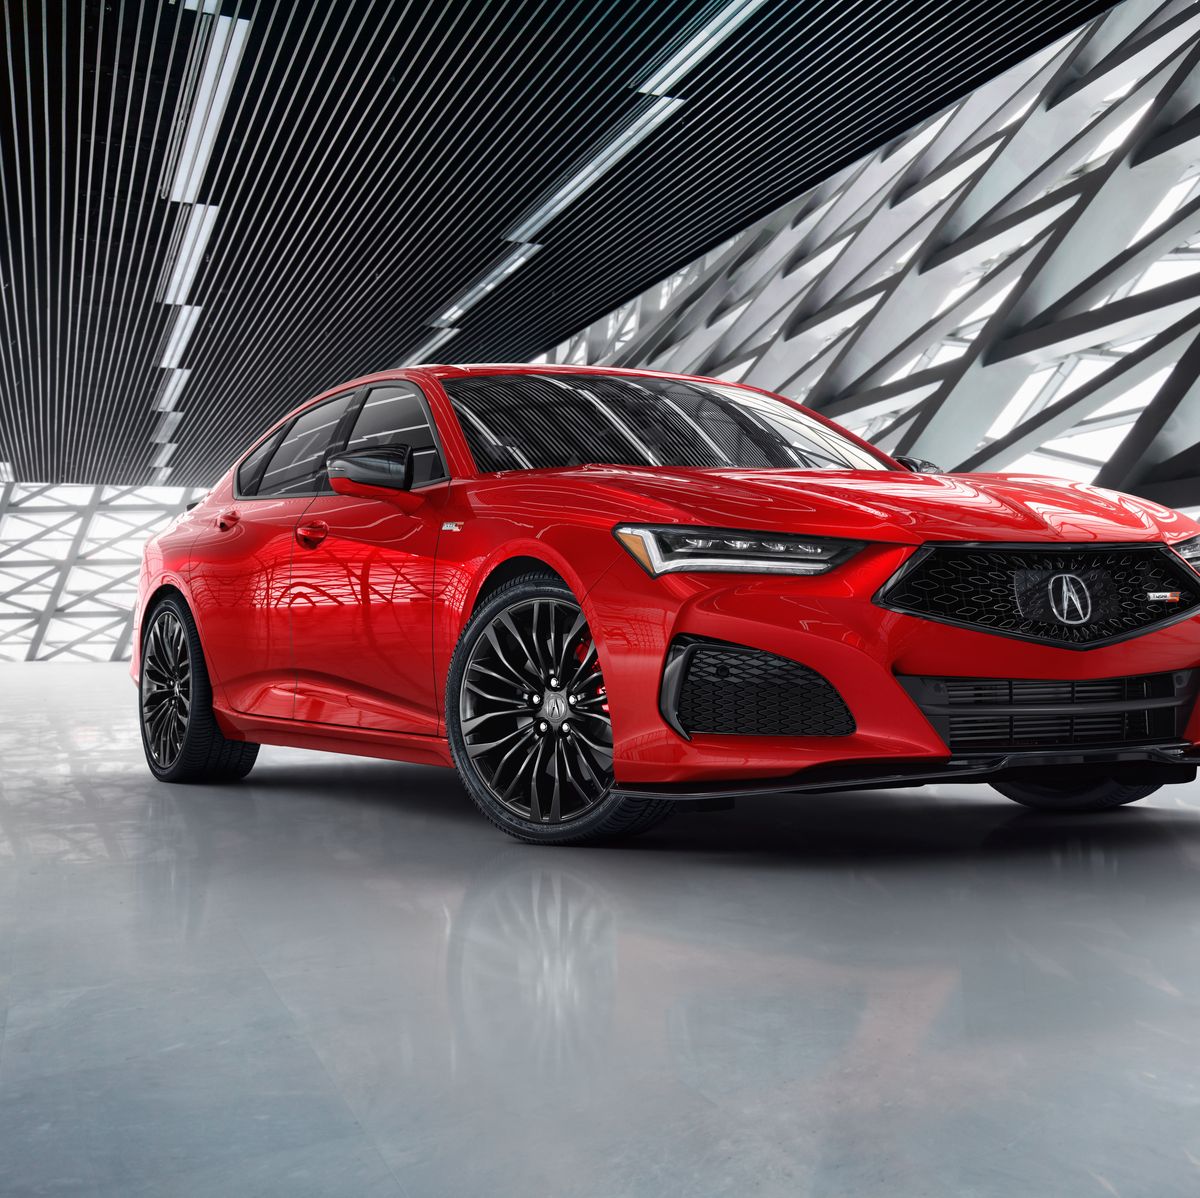 Image posted by tlx